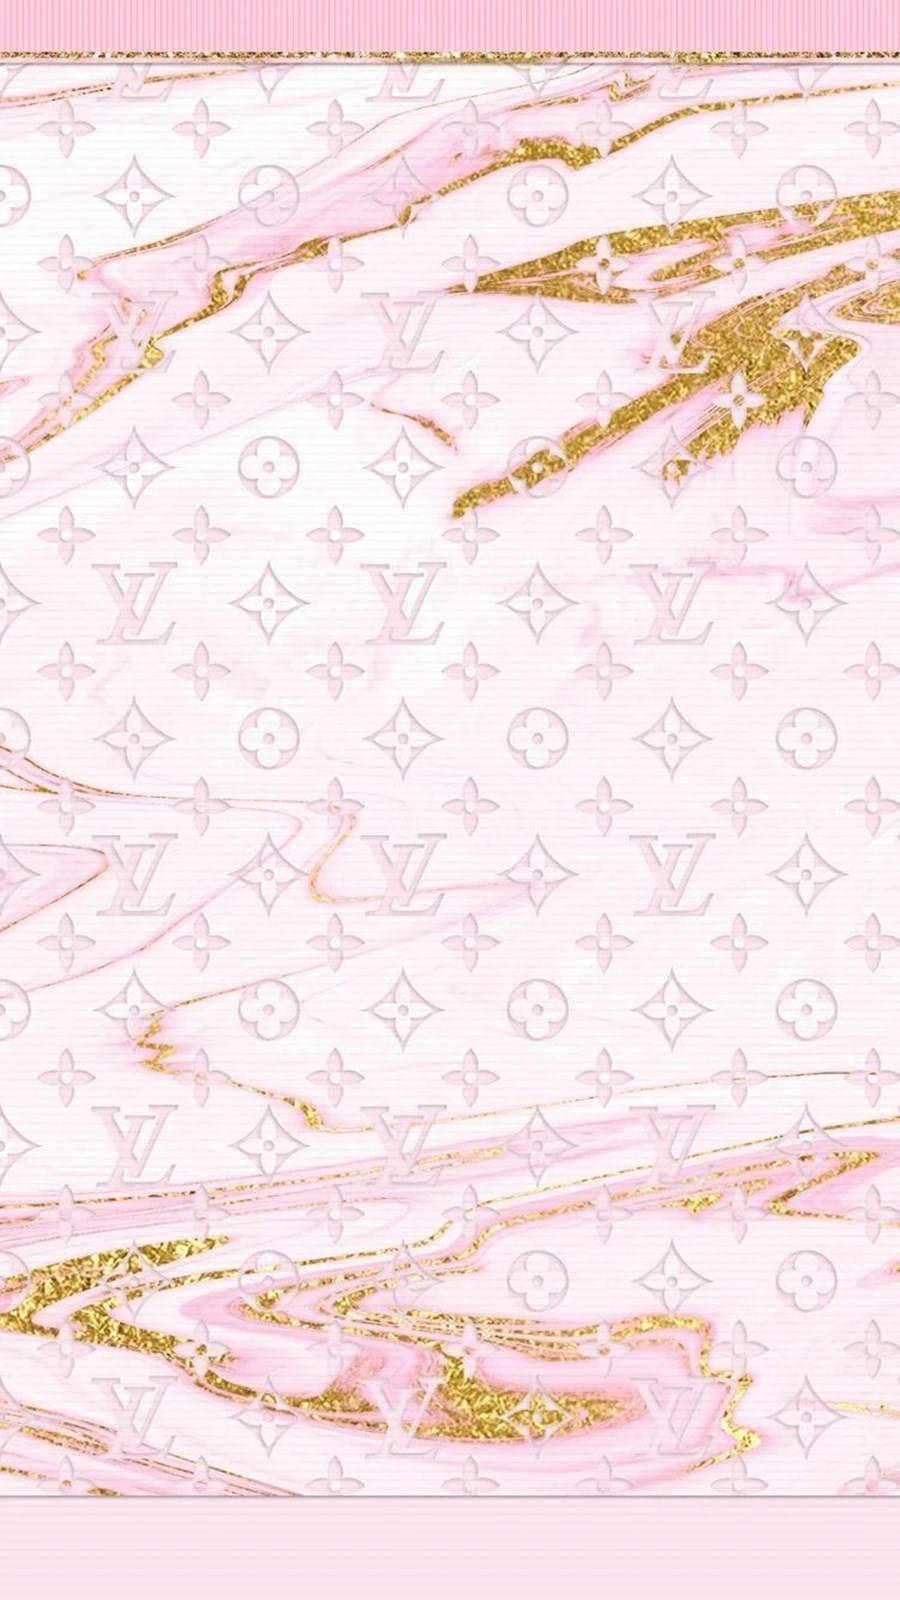 100+] Louis Vuitton Aesthetic Wallpapers